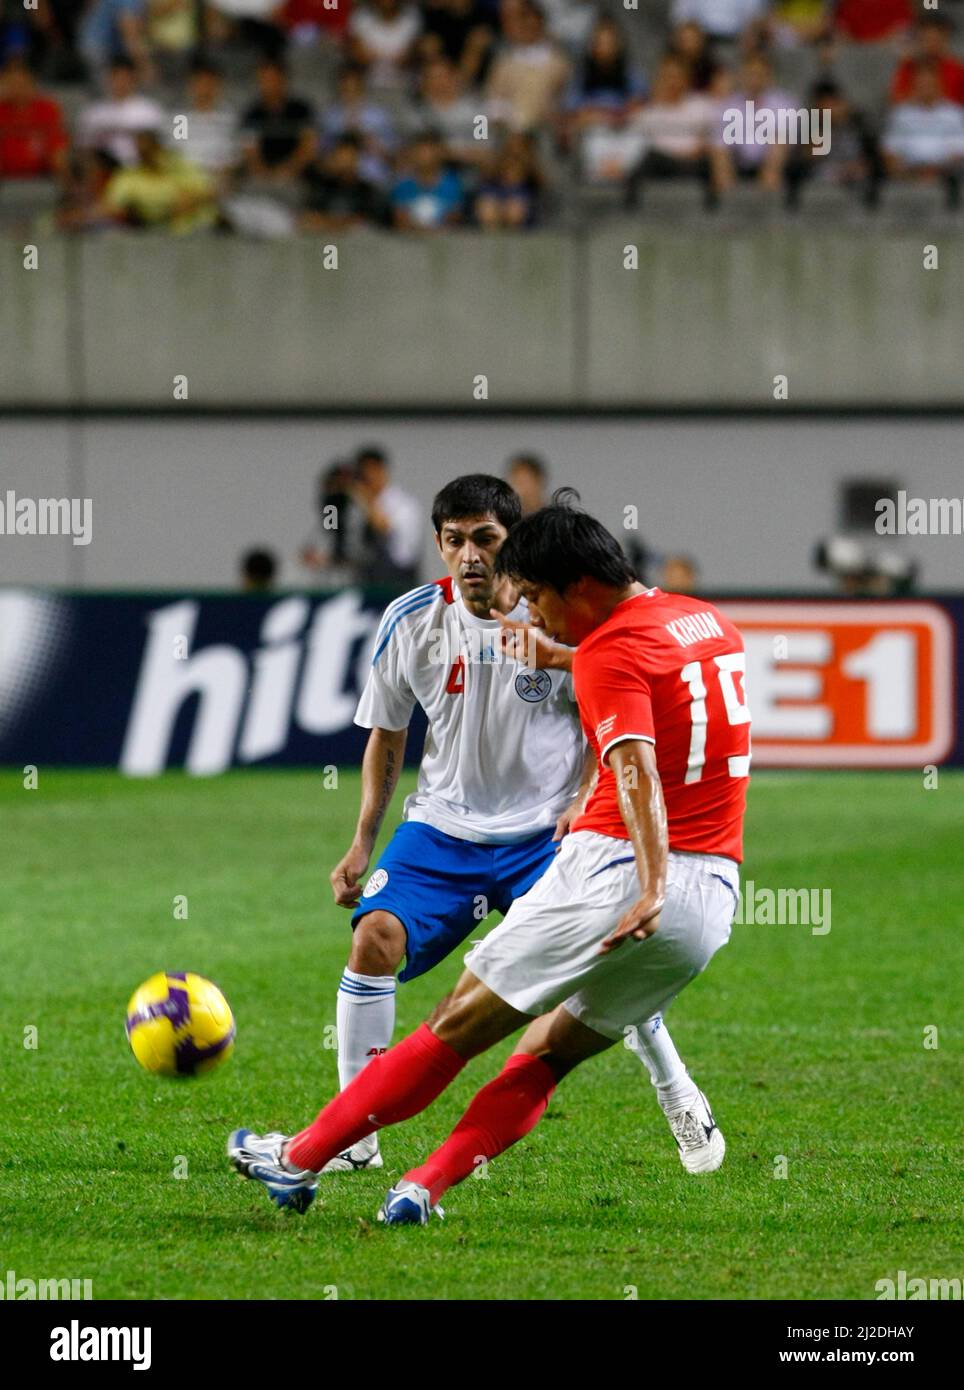 Aug 12, 2009-Seoul, South Korea-Yeom Ki-Hun(ftont), South Korea, and Denis Caniza, Paraguay, compete for the ball during the international friendly match between South Korea and Paraguay at Seoul Worldcup stadium on August 12, 2009 in Seoul, South Korea. Stock Photo